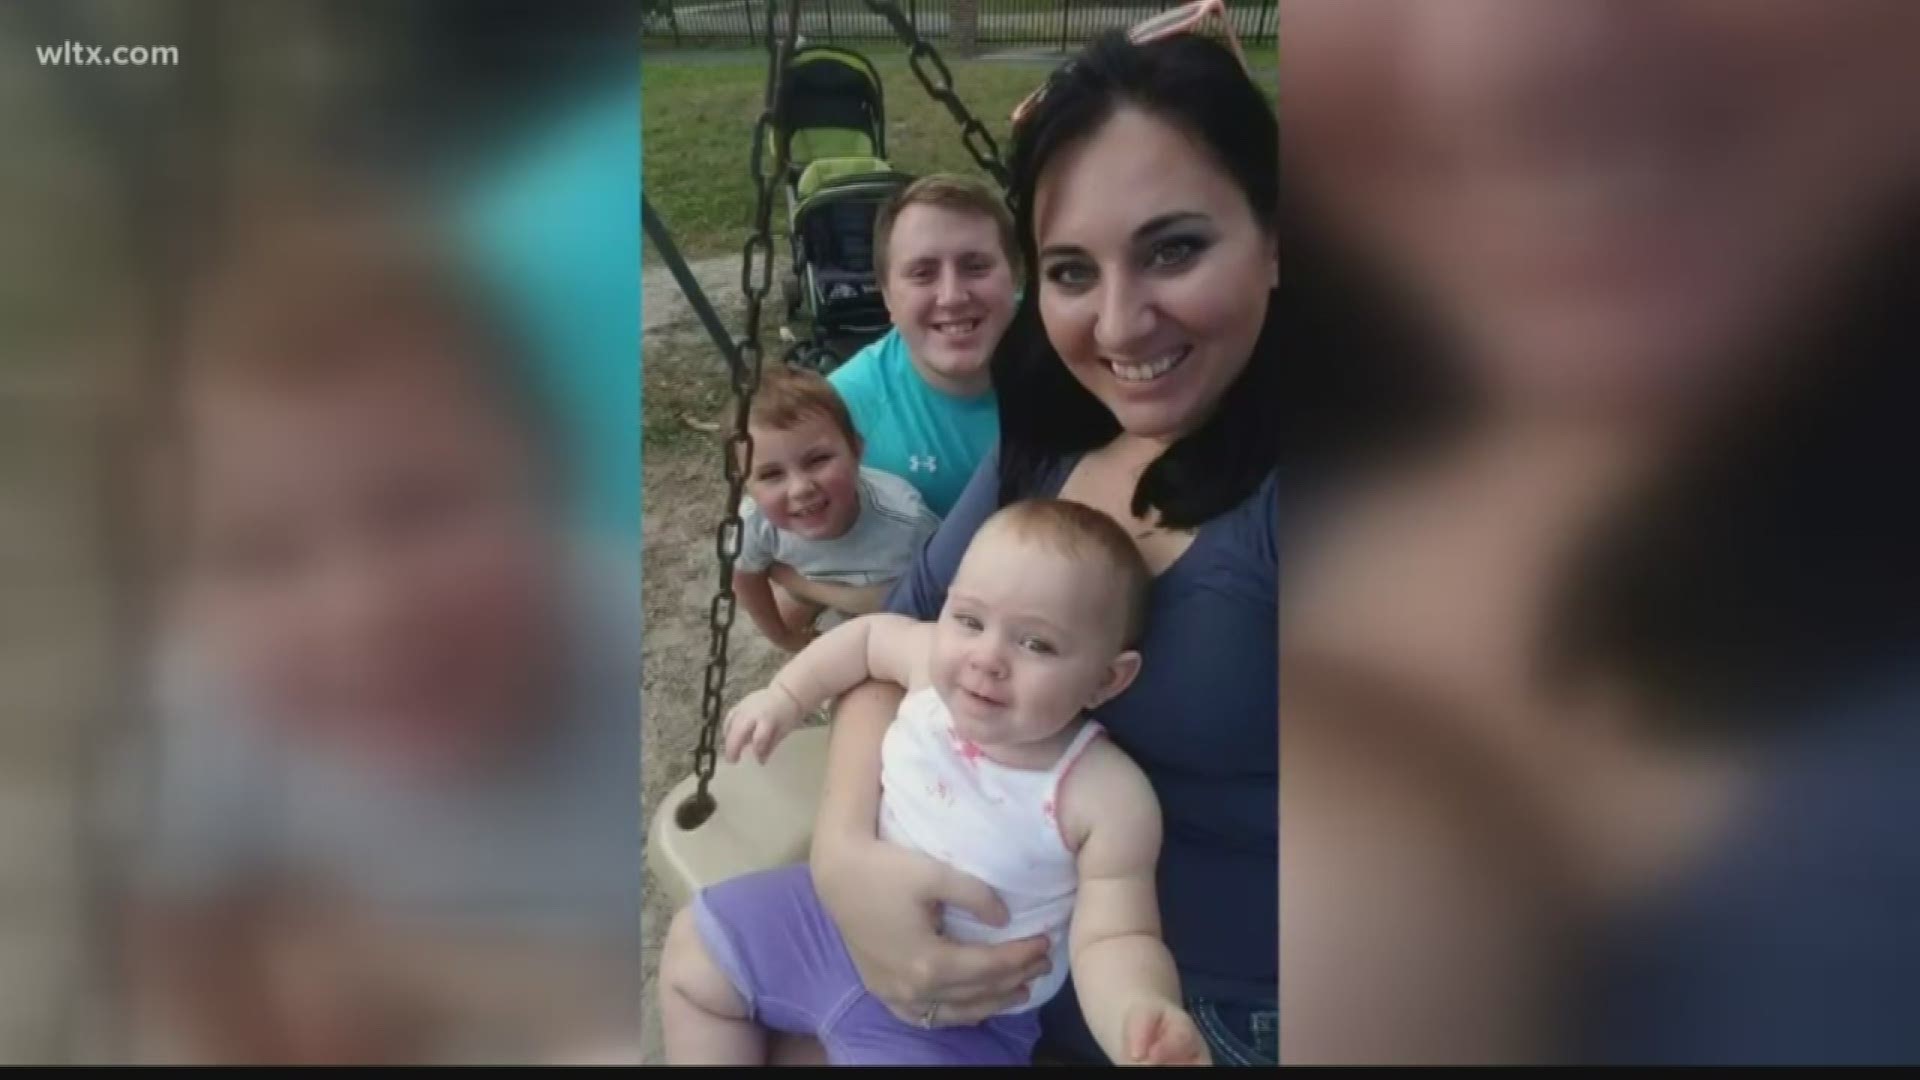 Joshua Stanley's wife struck a 9-foot alligator that was on I-95, then her car struck a tree and caught fire.  Both his wife and two children were killed in the crash.